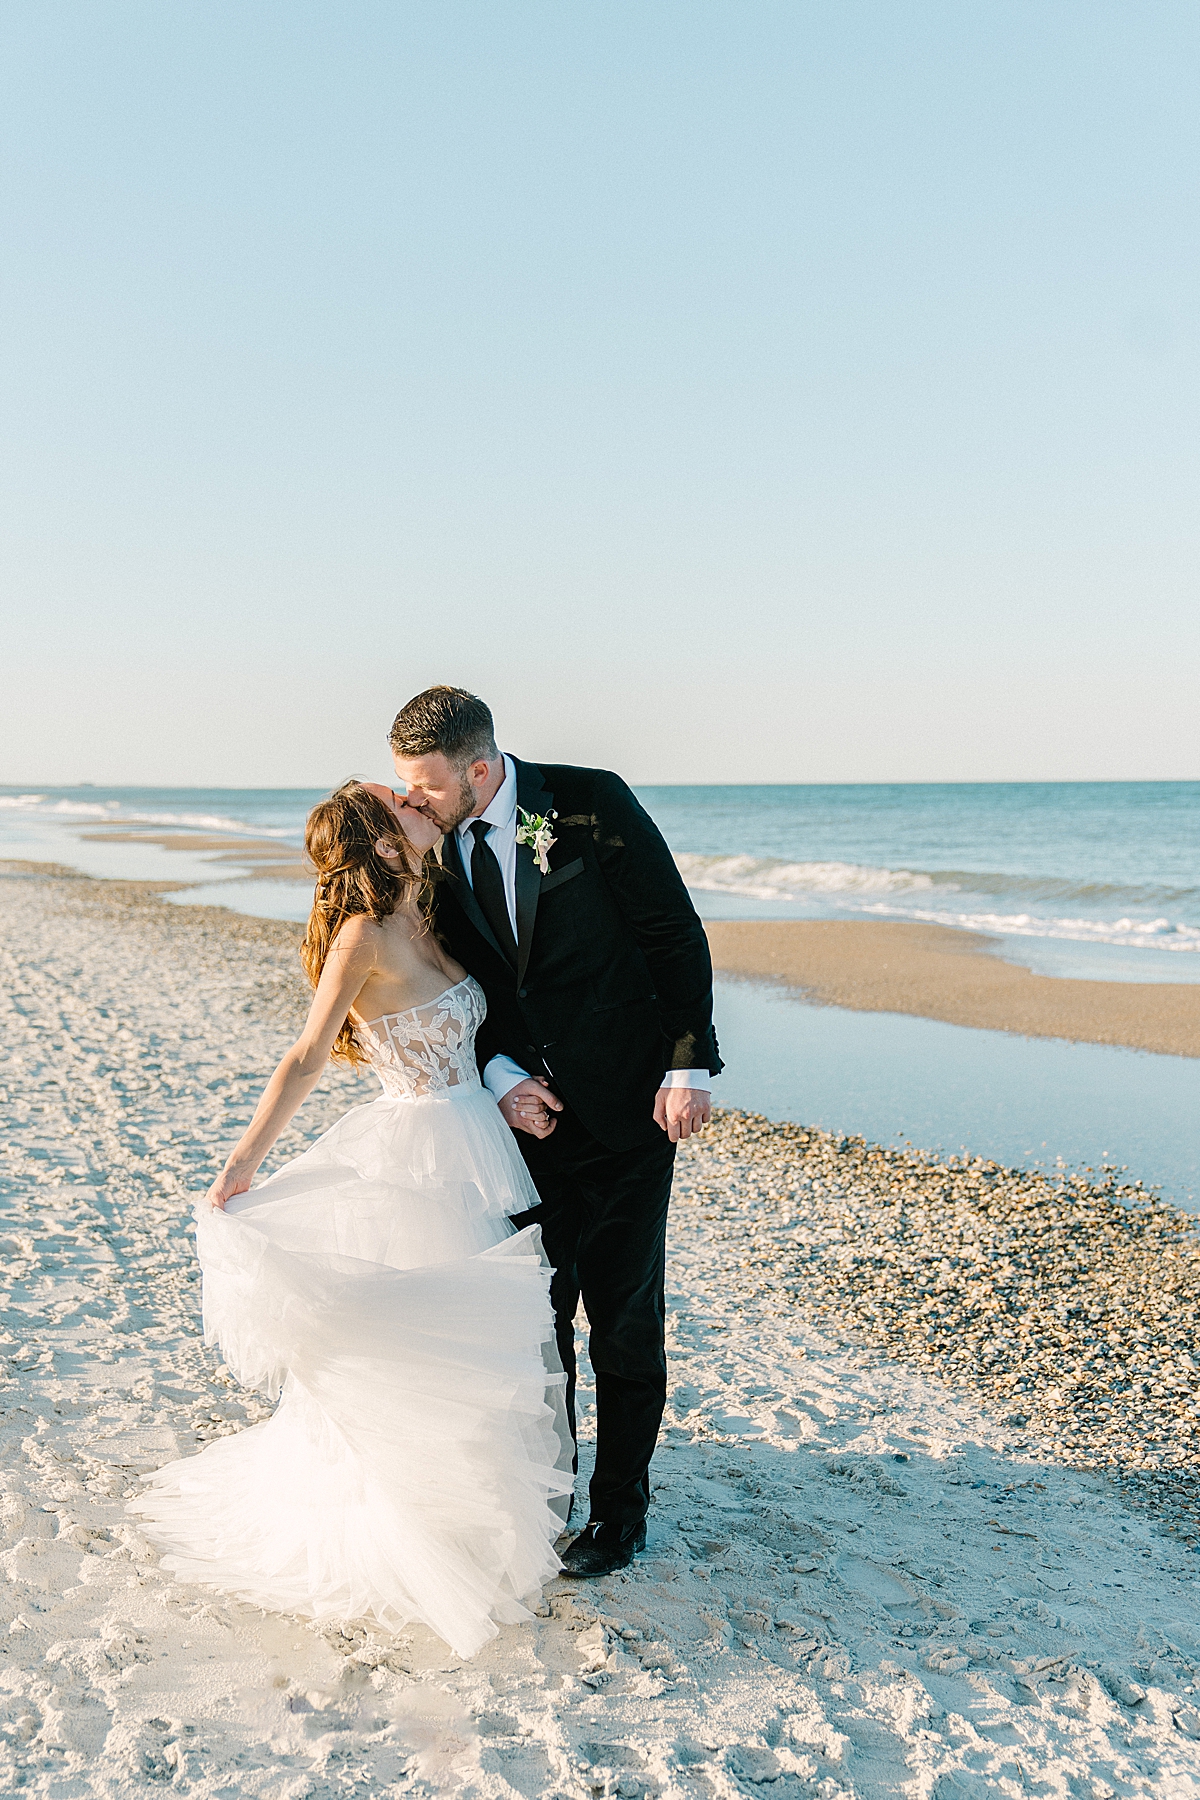 A bride and groom kiss on the beach in Florida.